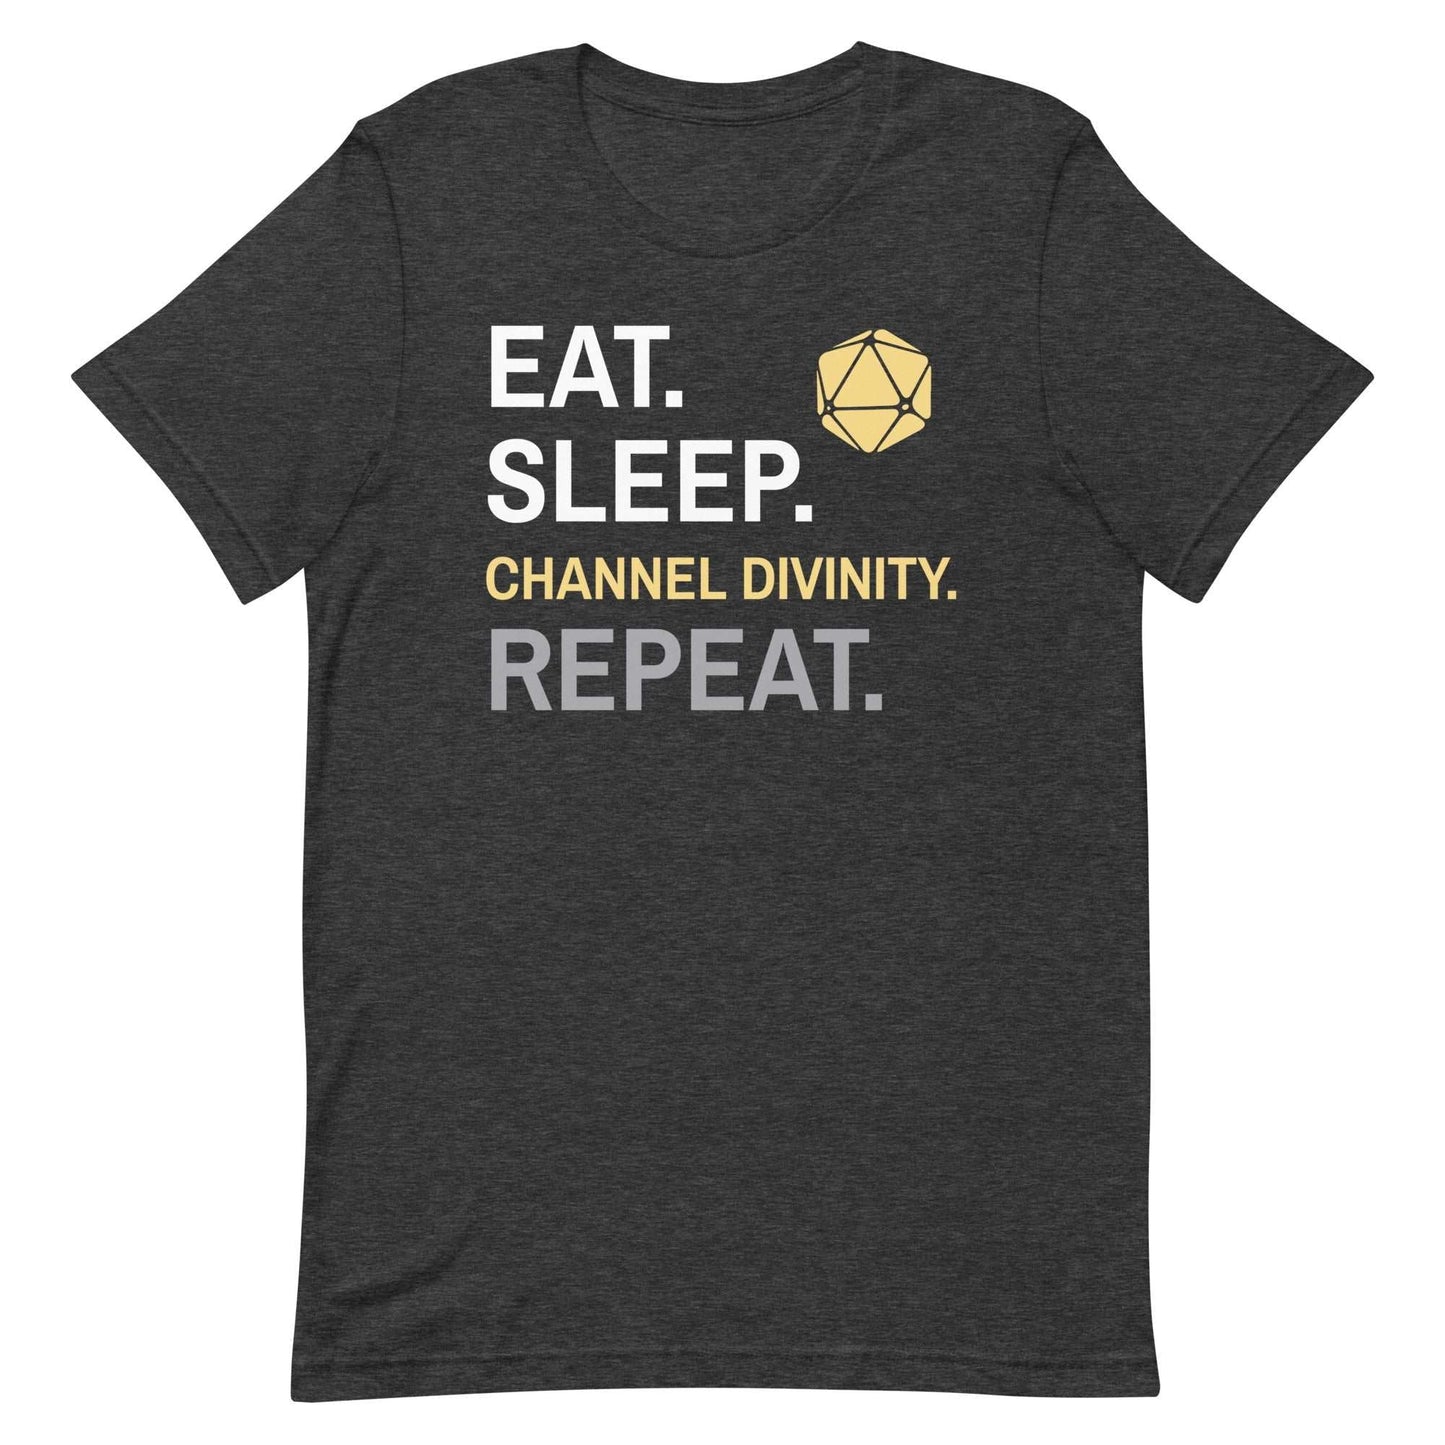 Cleric Class T-Shirt – 'Eat, Sleep, Channel Divinity, Repeat' – Dungeons & Dragons Cleric Class Apparel T-Shirt Dark Grey Heather / S